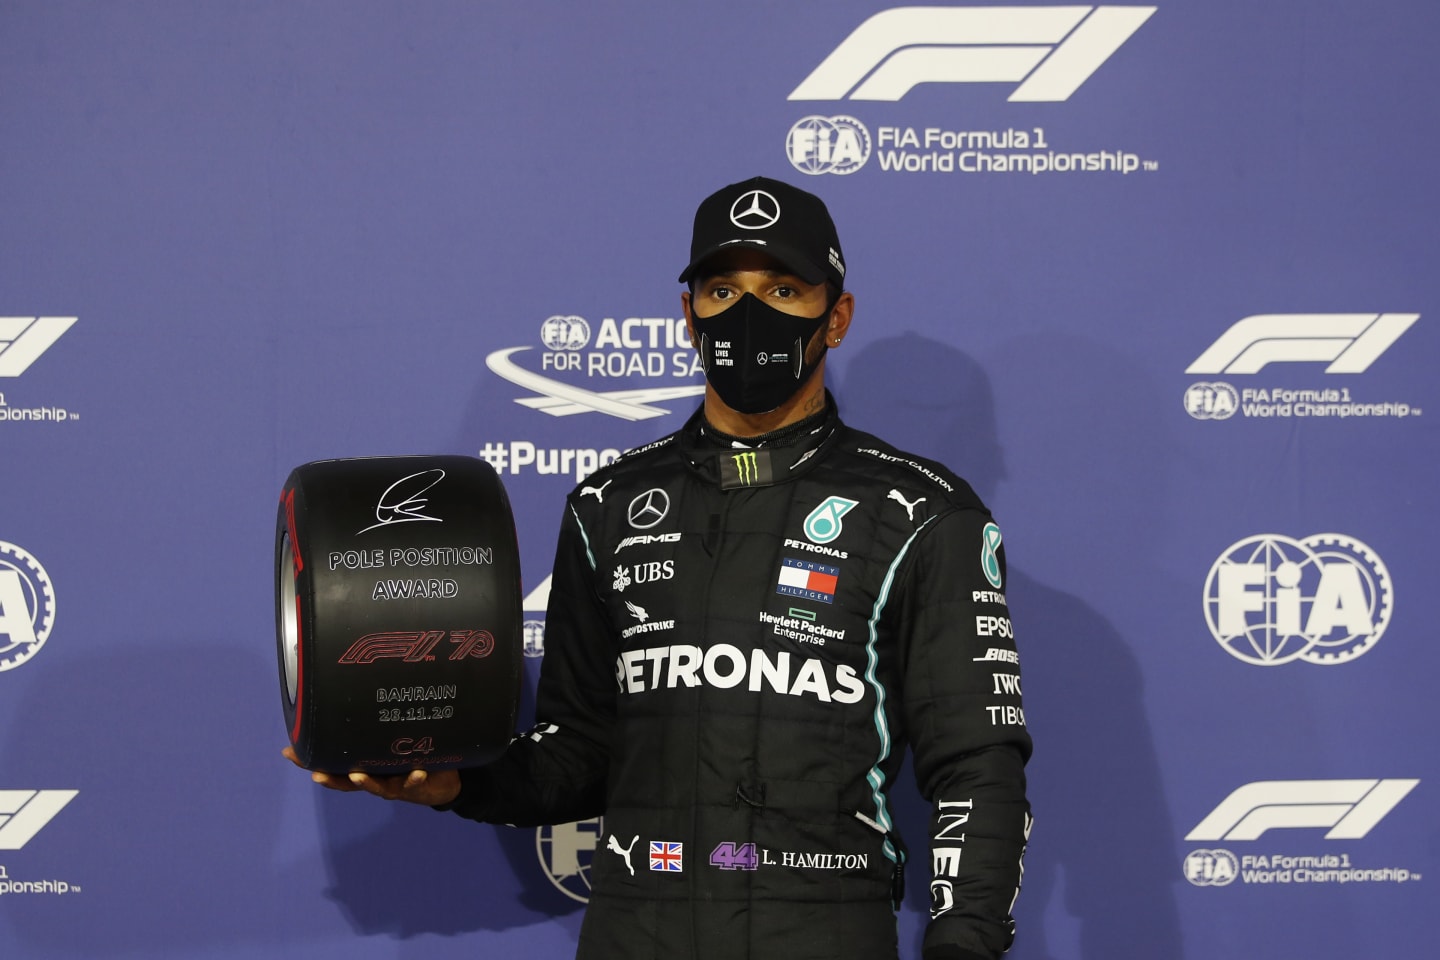 BAHRAIN, BAHRAIN - NOVEMBER 28: Pole position qualifier Lewis Hamilton of Great Britain and Mercedes GP poses with the pole position award in parc ferme during qualifying ahead of the F1 Grand Prix of Bahrain at Bahrain International Circuit on November 28, 2020 in Bahrain, Bahrain. (Photo by Hamad Mohammed - Pool/Getty Images)